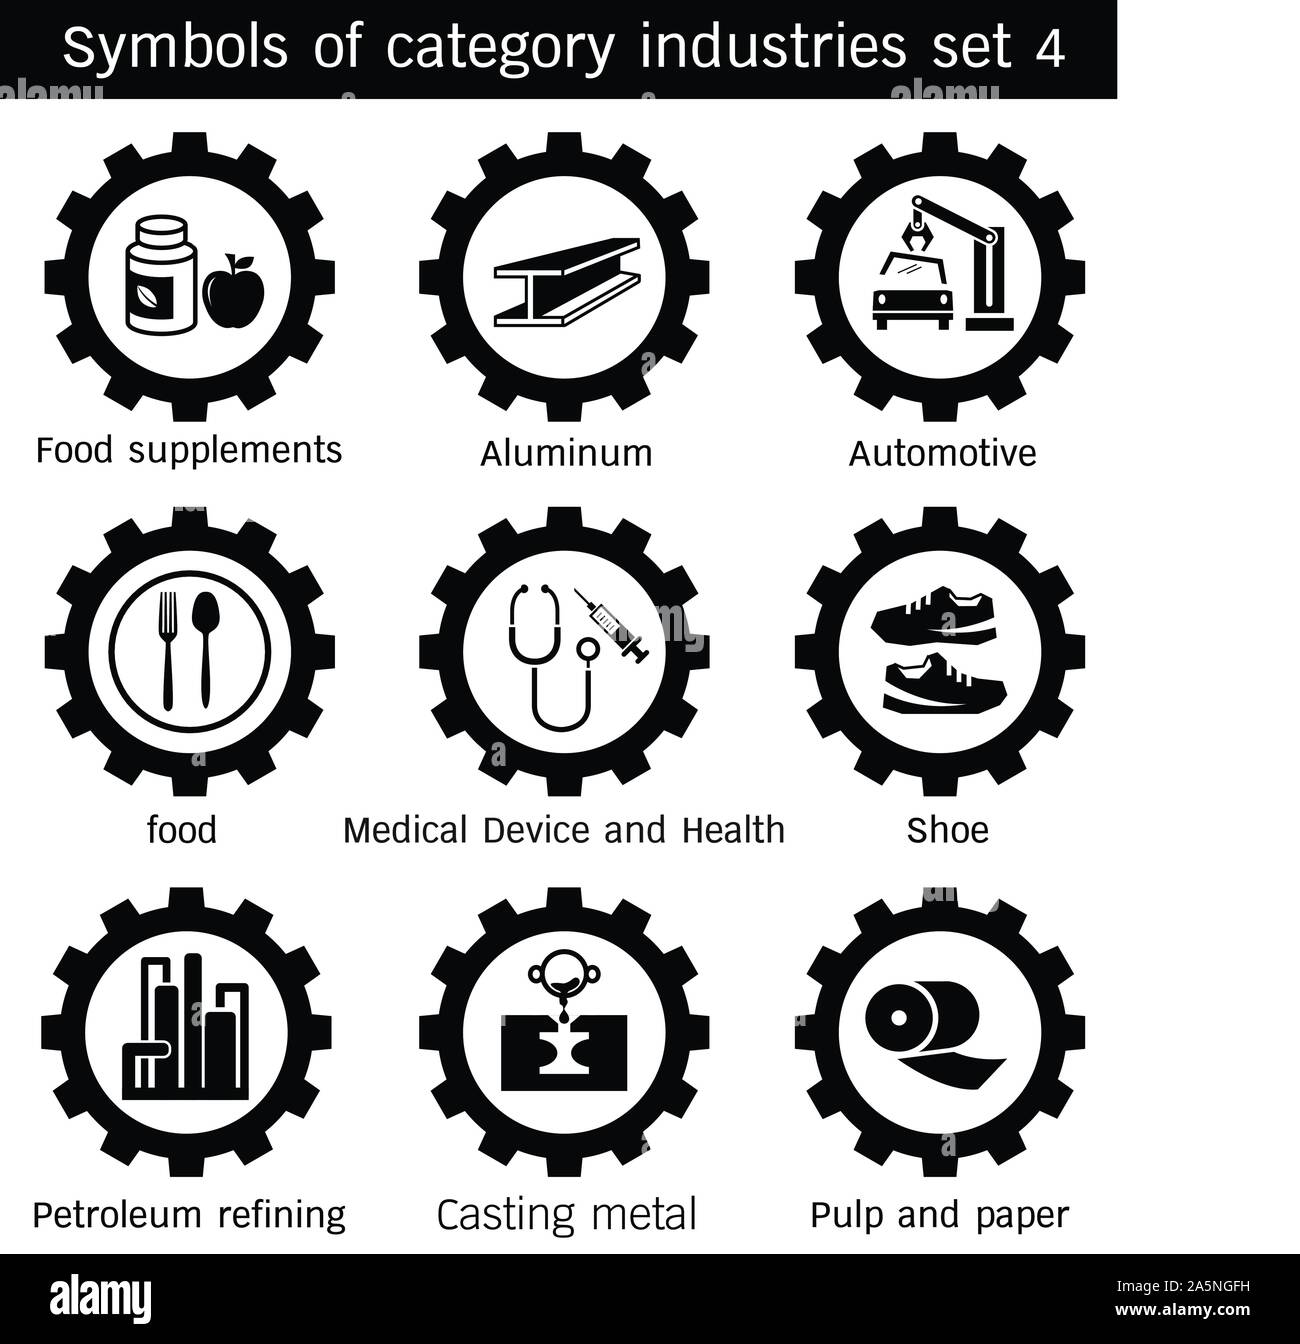 Symbols category industry of Automotive, Pulp and paper, Medical Device and Health, Casting metal, Shoe, Food supplements, Food,Petroleum refining, Al Stock Vector